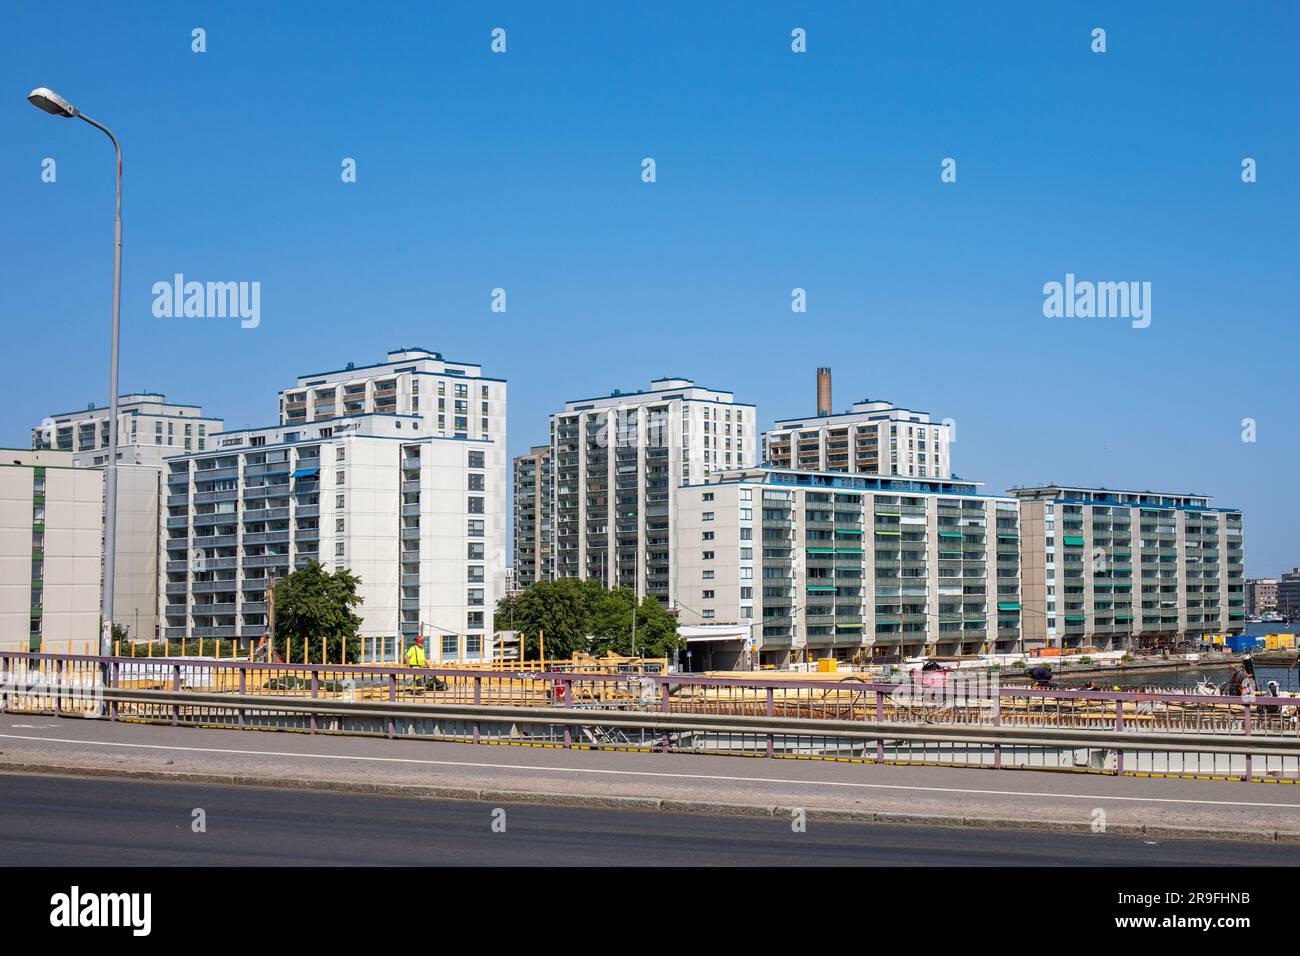 Concrete architecture of residential Merihaka district against clear blue sky on a sunny summer day in Helsinki, Finland Stock Photo